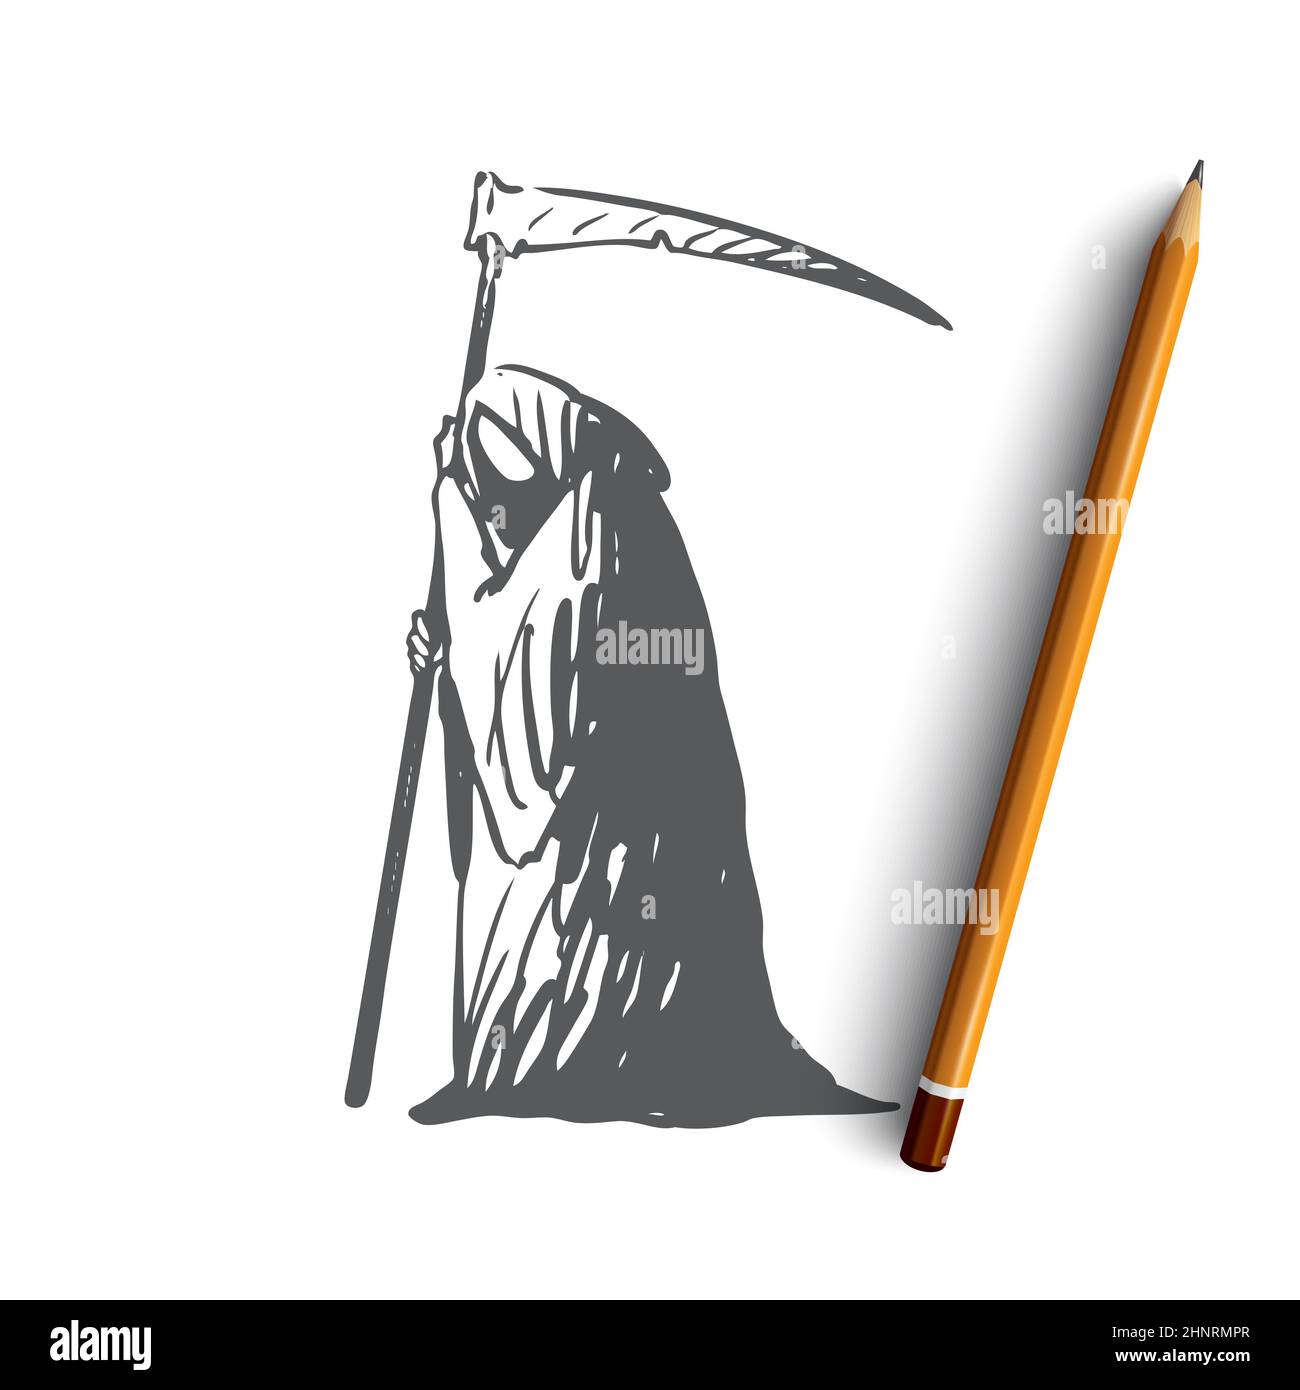 Death, costume, carnival, monster, spooky concept. Hand drawn person in dress of death concept sketch. Isolated vector illustration. Stock Photo